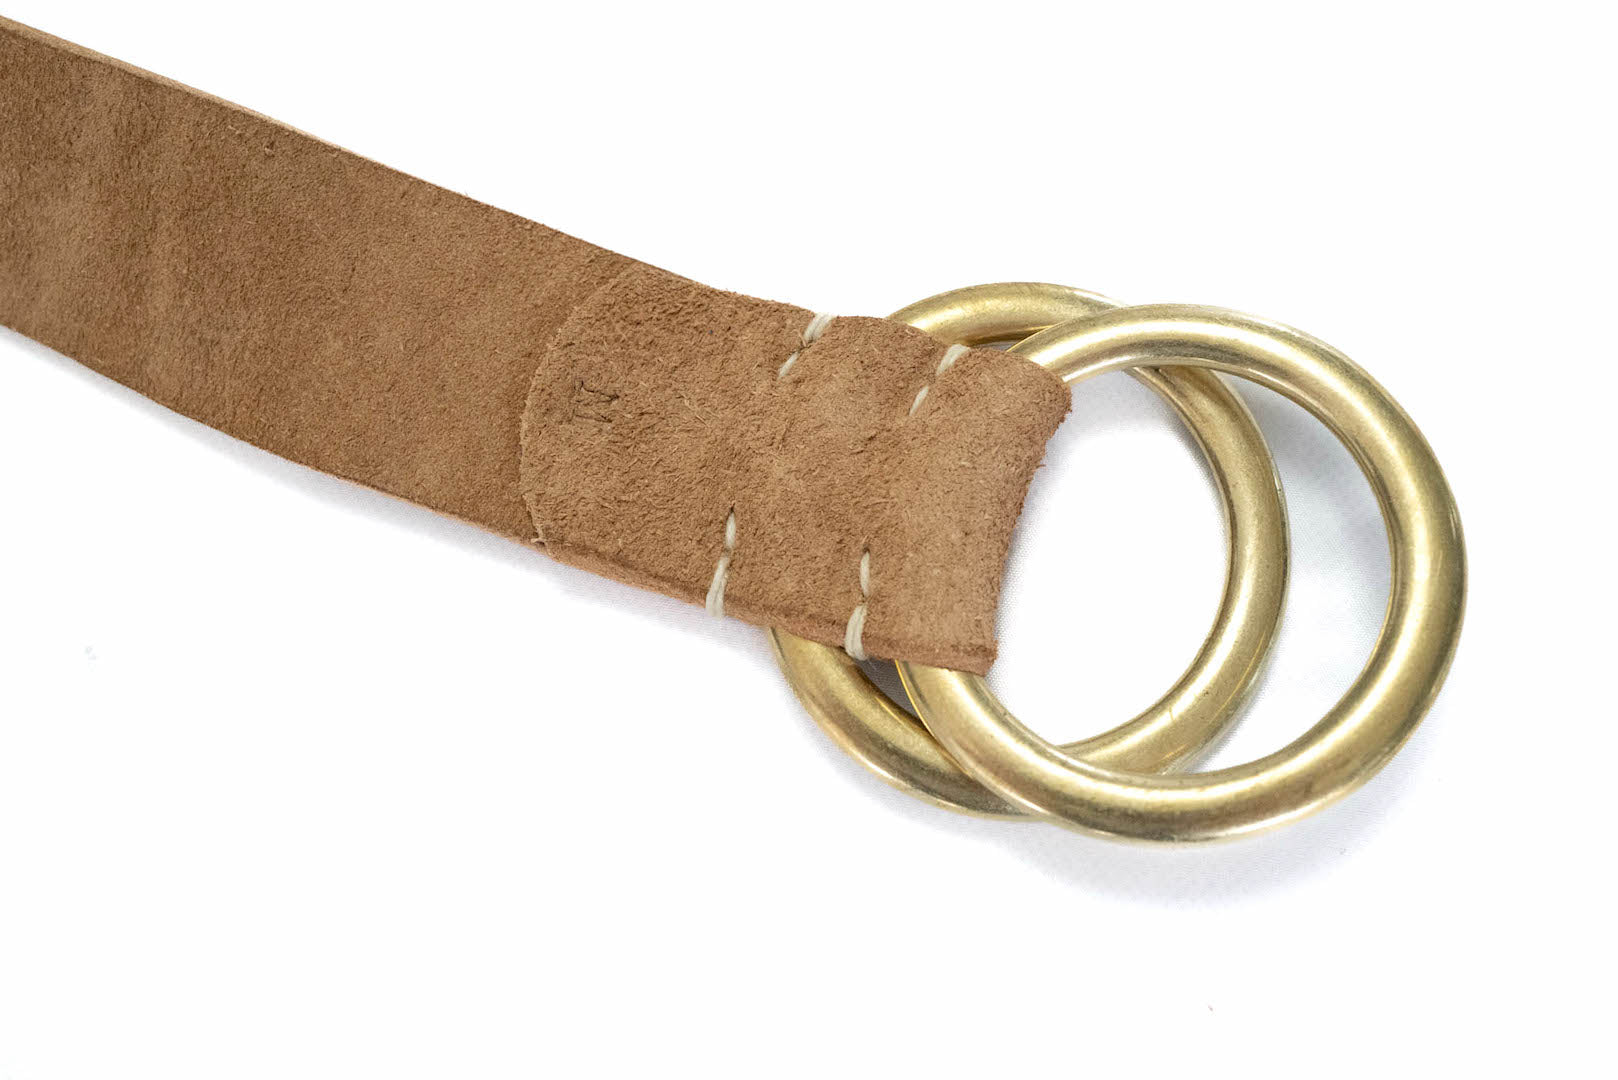 Warehouse Co "Double Rings" Suede Cowhide Belt (Icy Mocha)